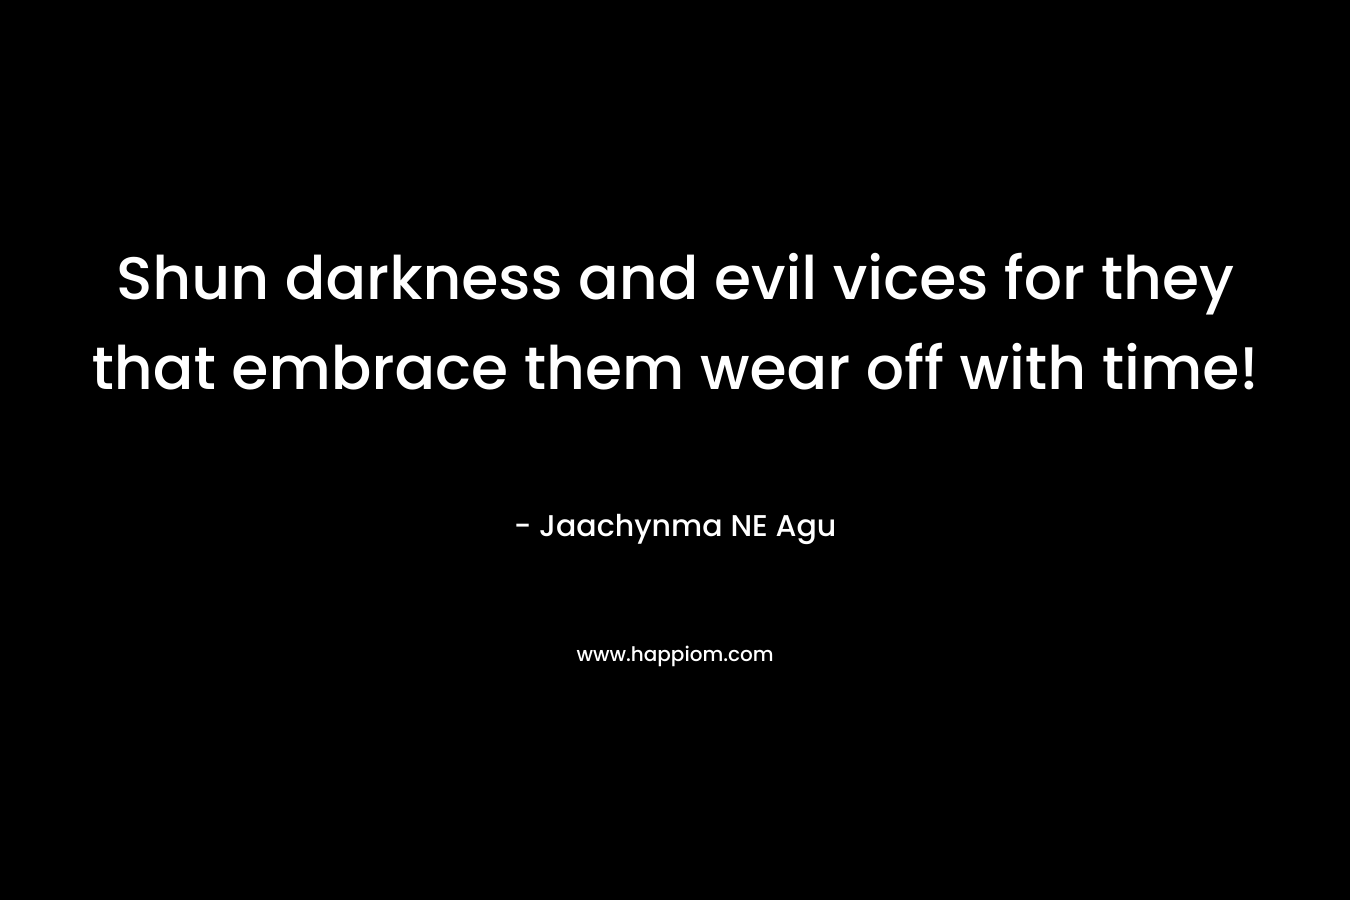 Shun darkness and evil vices for they that embrace them wear off with time! – Jaachynma NE Agu